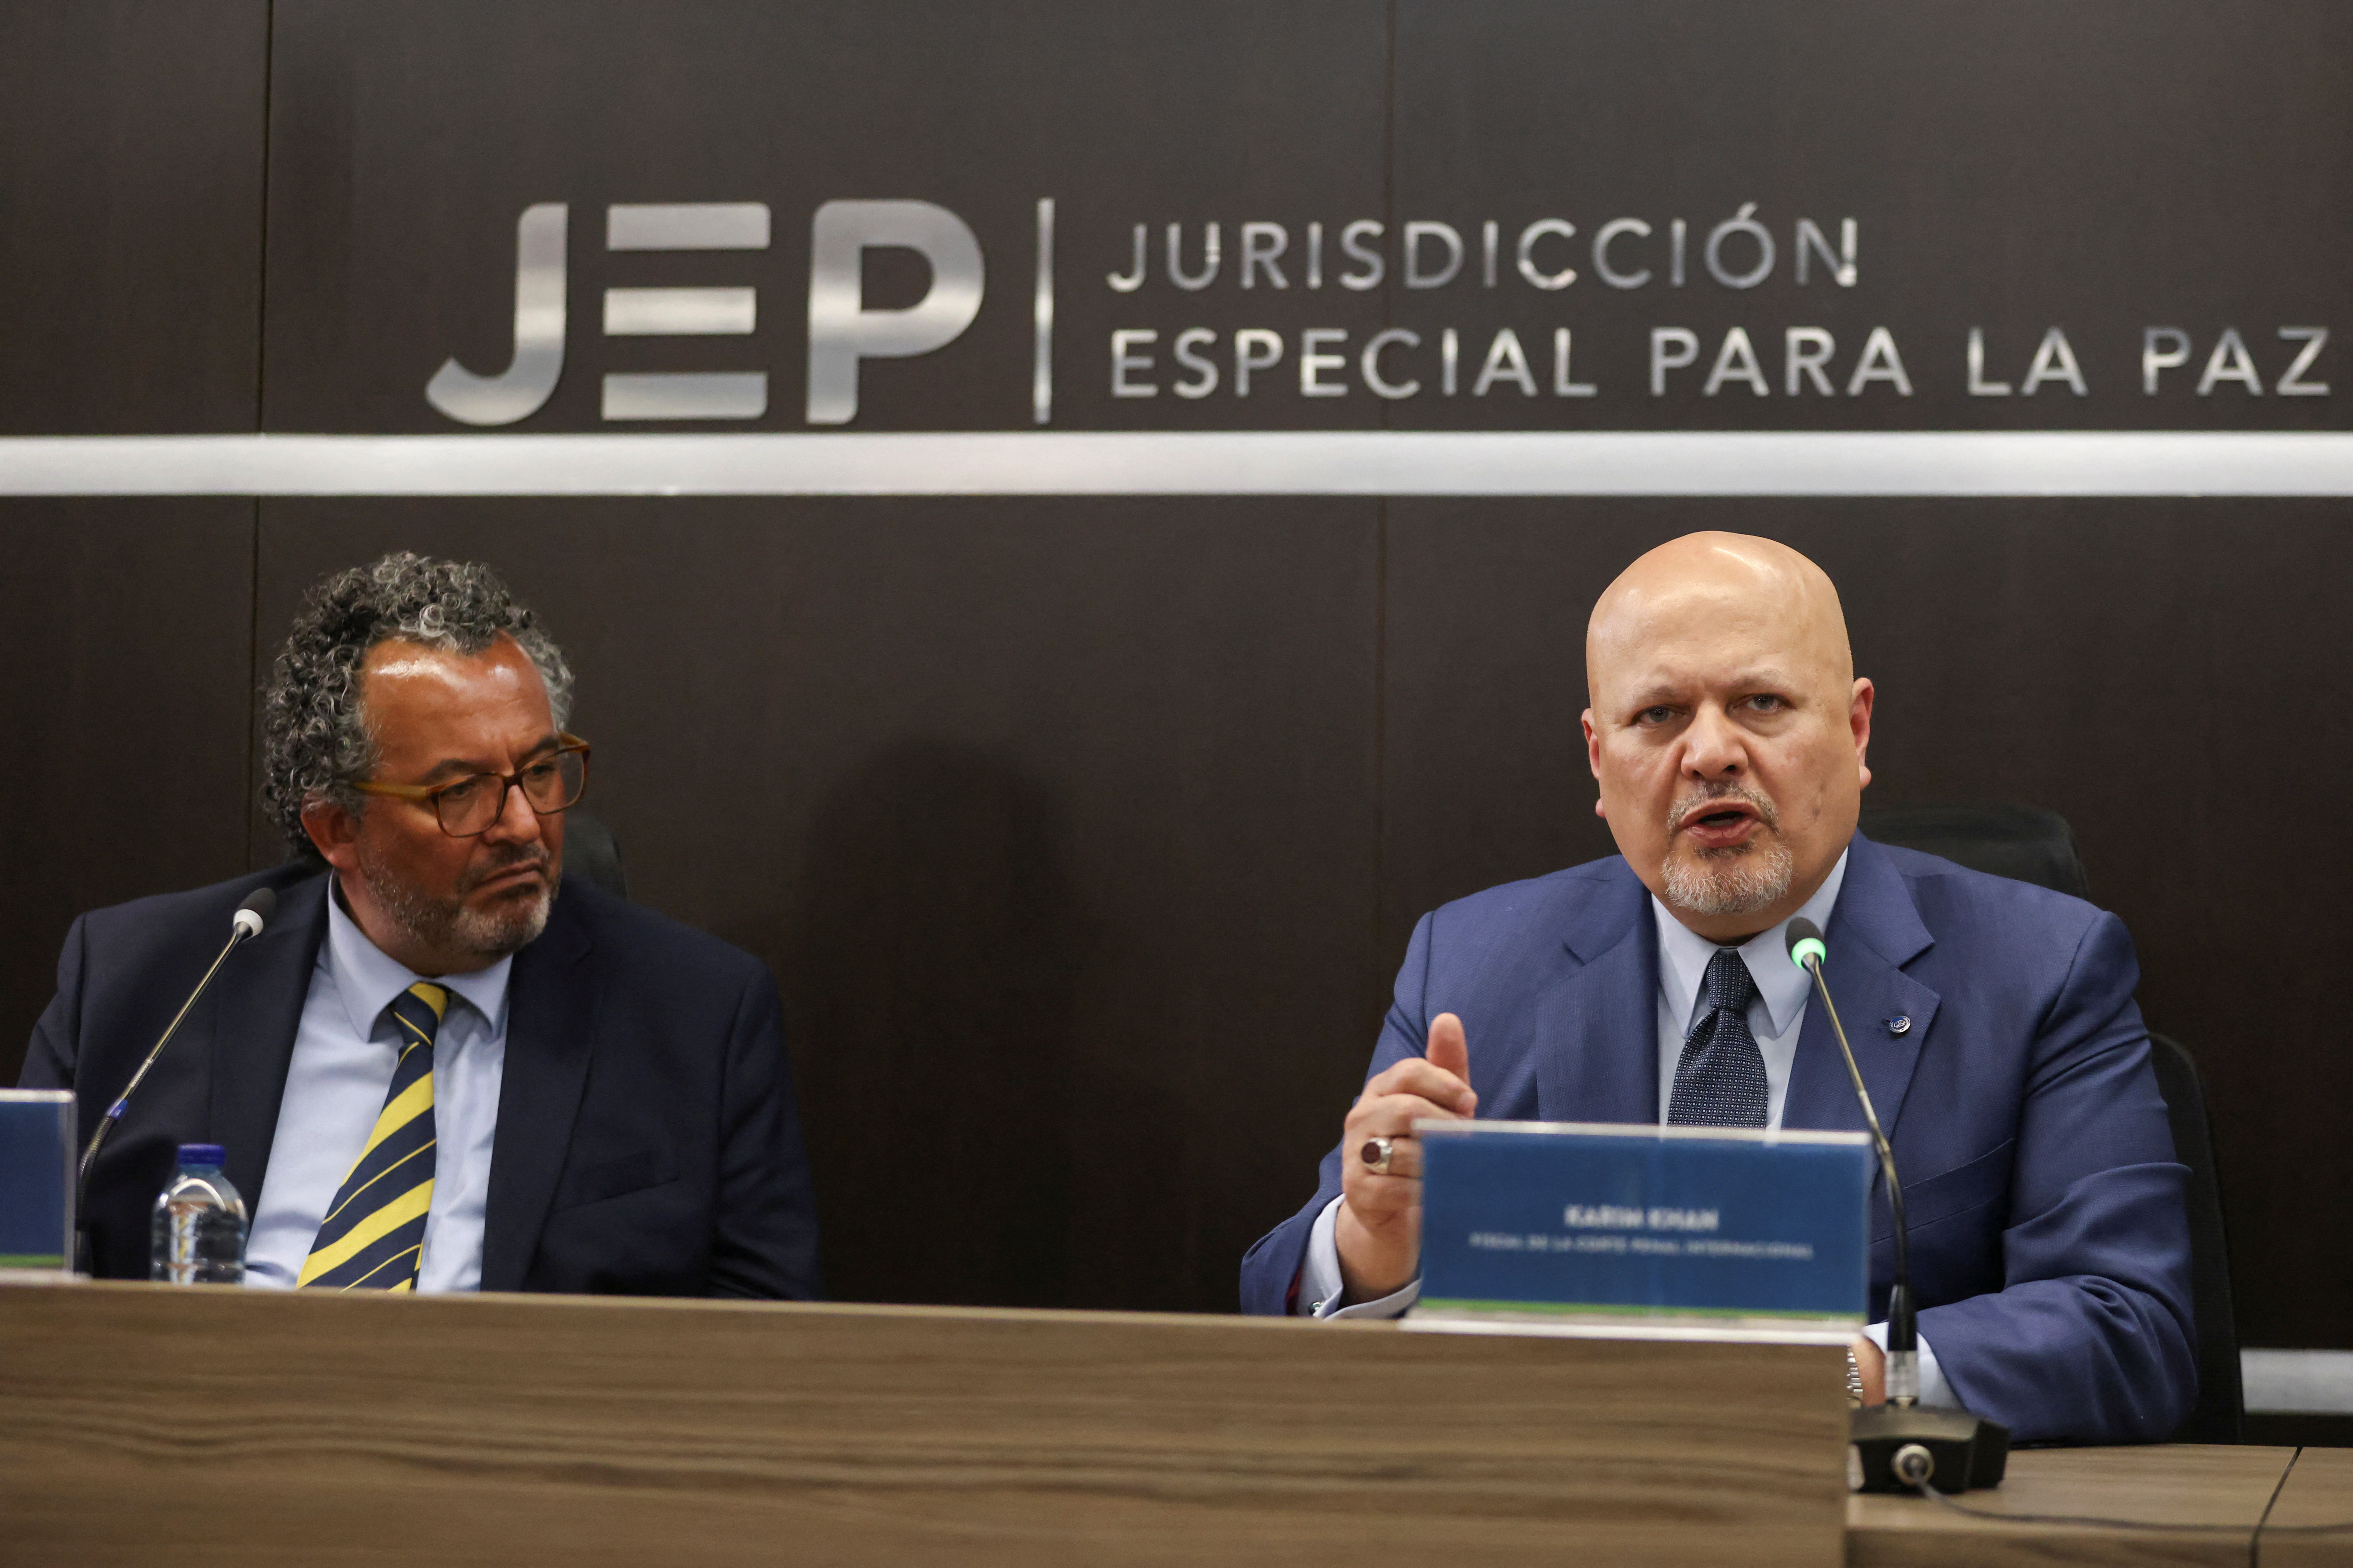 ICC prosecutor Karim Khan speaks during a press conference at the Special Jurisdiction for Peace court as Magistrate Roberto Vidal, President of the Special Jurisdiction for Peace listens, in Bogota, Colombia June 6, 2023. REUTERS/Luisa Gonzalez